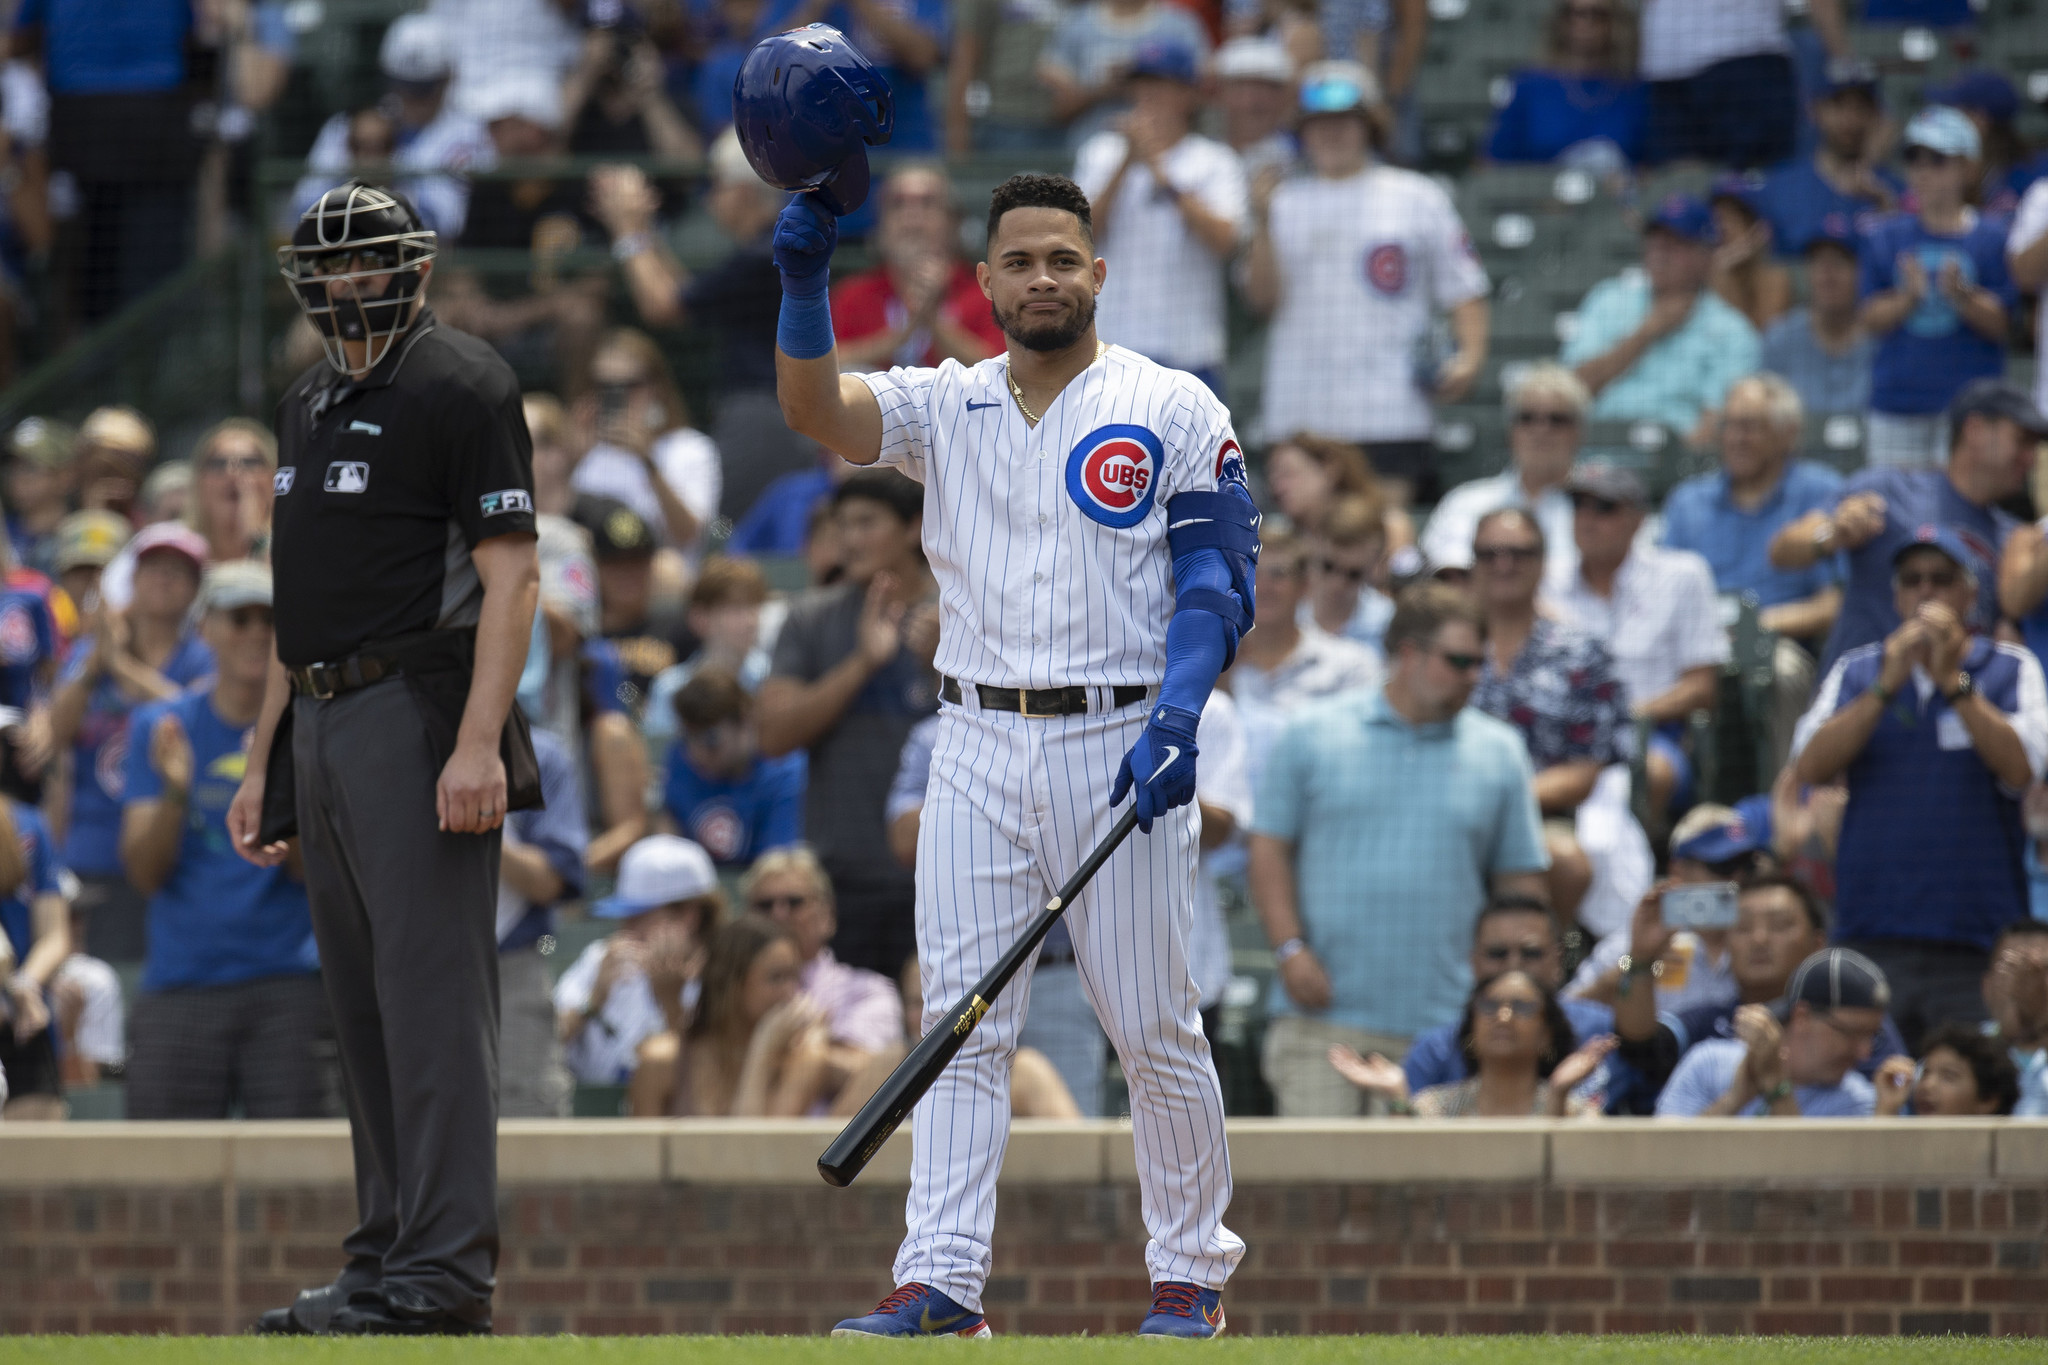 Reports: Former Chicago Cub Willson Contreras signs with Cardinals